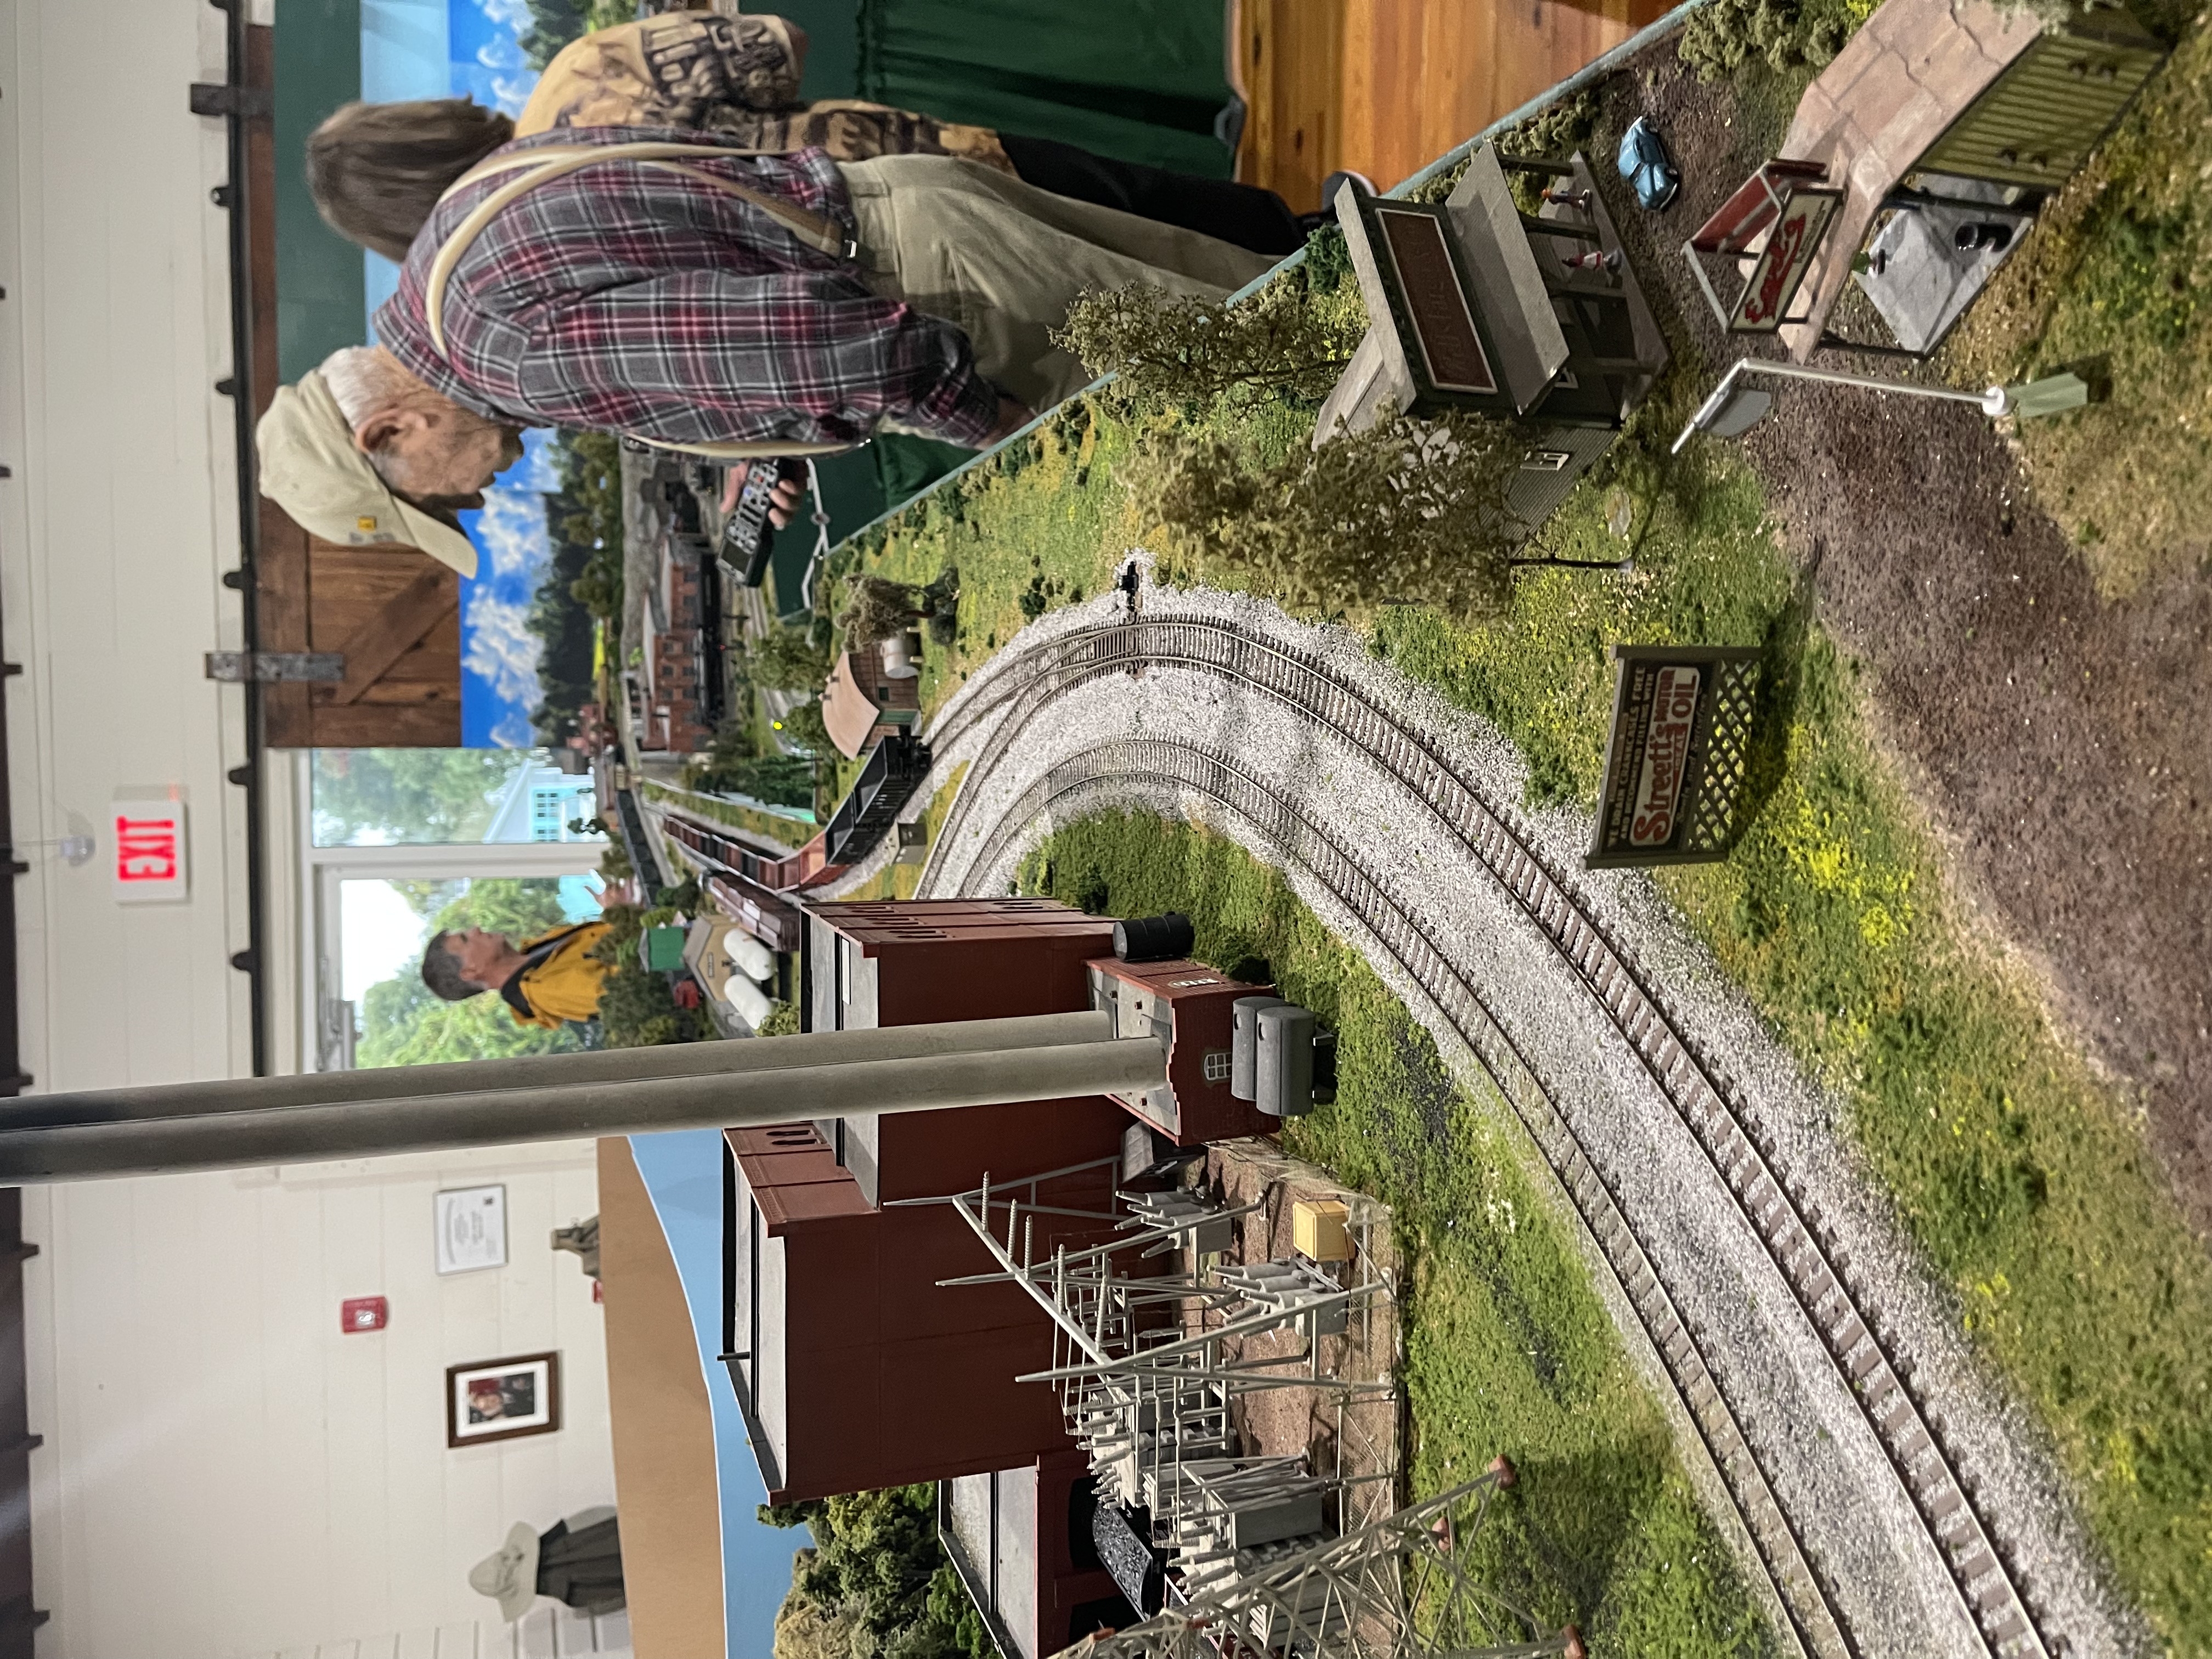 Inspecting the layout